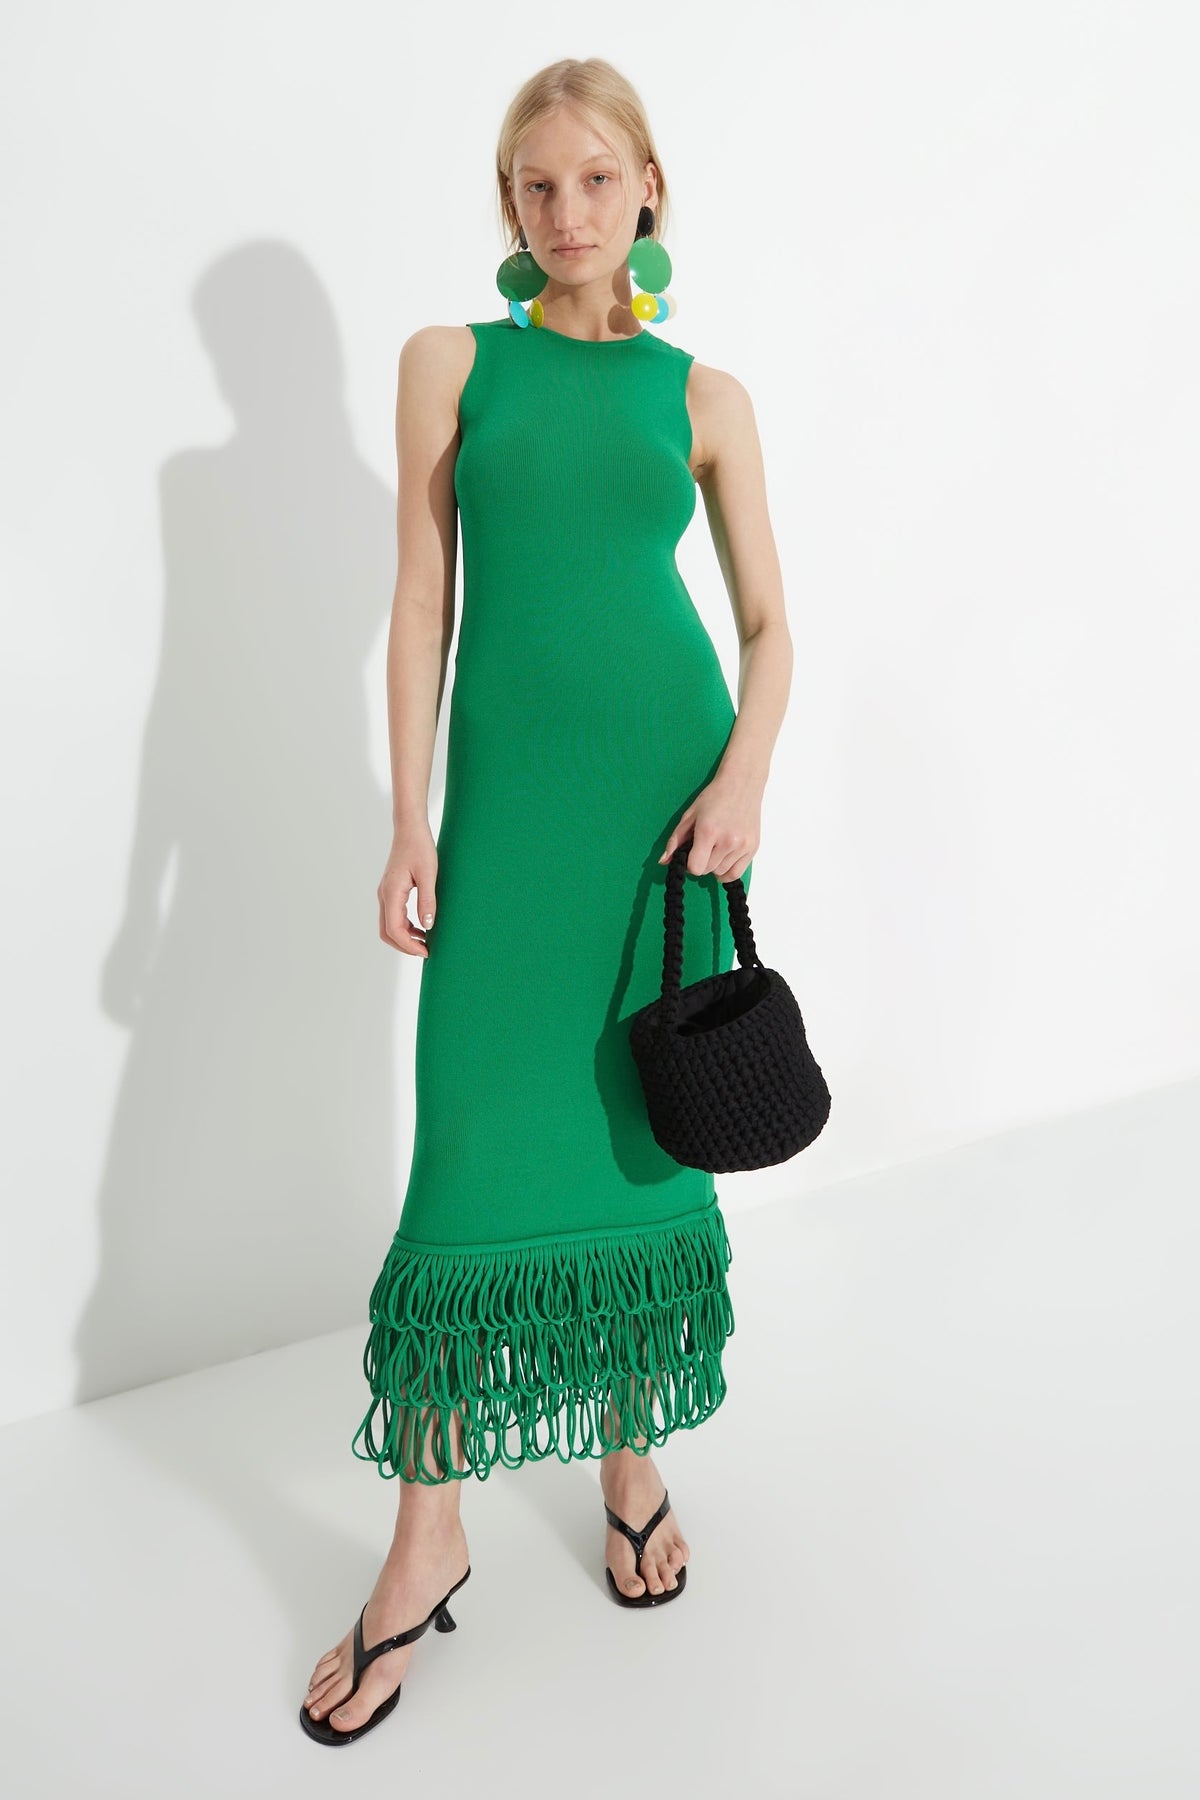 Knits By Albers Dress in Gummy Green